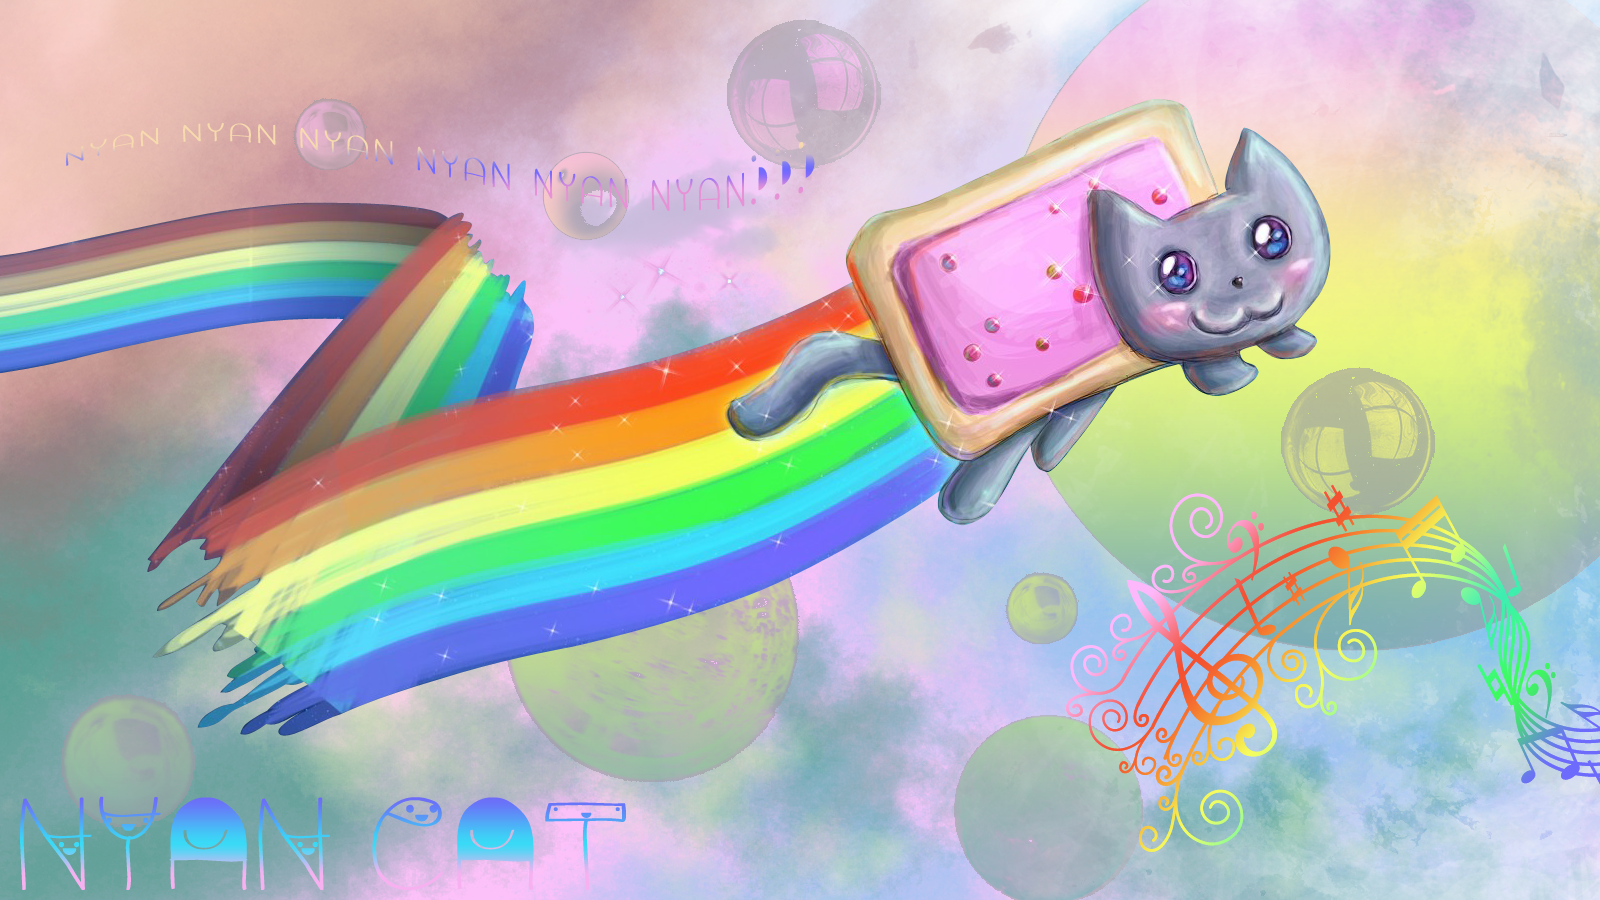 Free download Nyan cat wallpaper by unknownduchess d4foqzzpng Wallpaper Wiki [1600x900] for your Desktop, Mobile & Tablet. Explore Nyan Cat Windows Wallpaper. Nyan Cat Windows Wallpaper, Nyan Cat iPhone